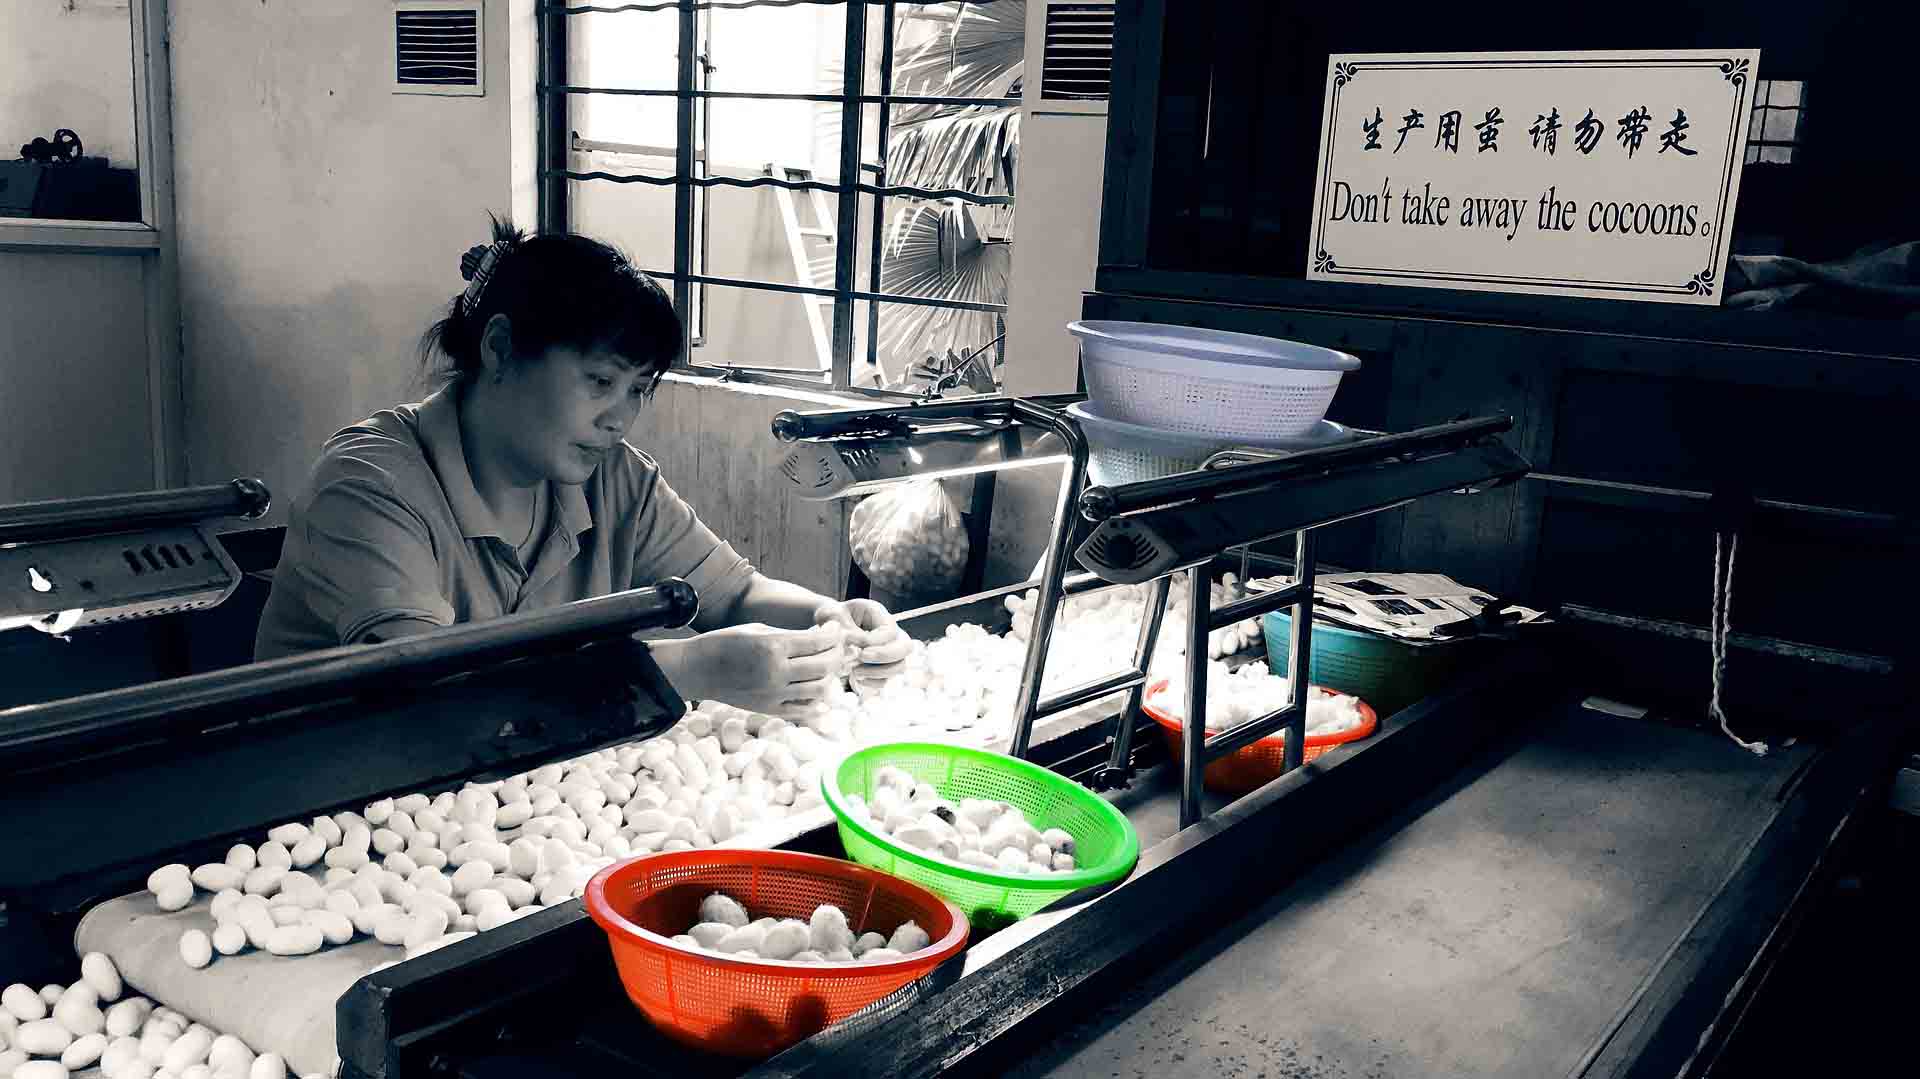 Woman sorting silk cocoons at a table